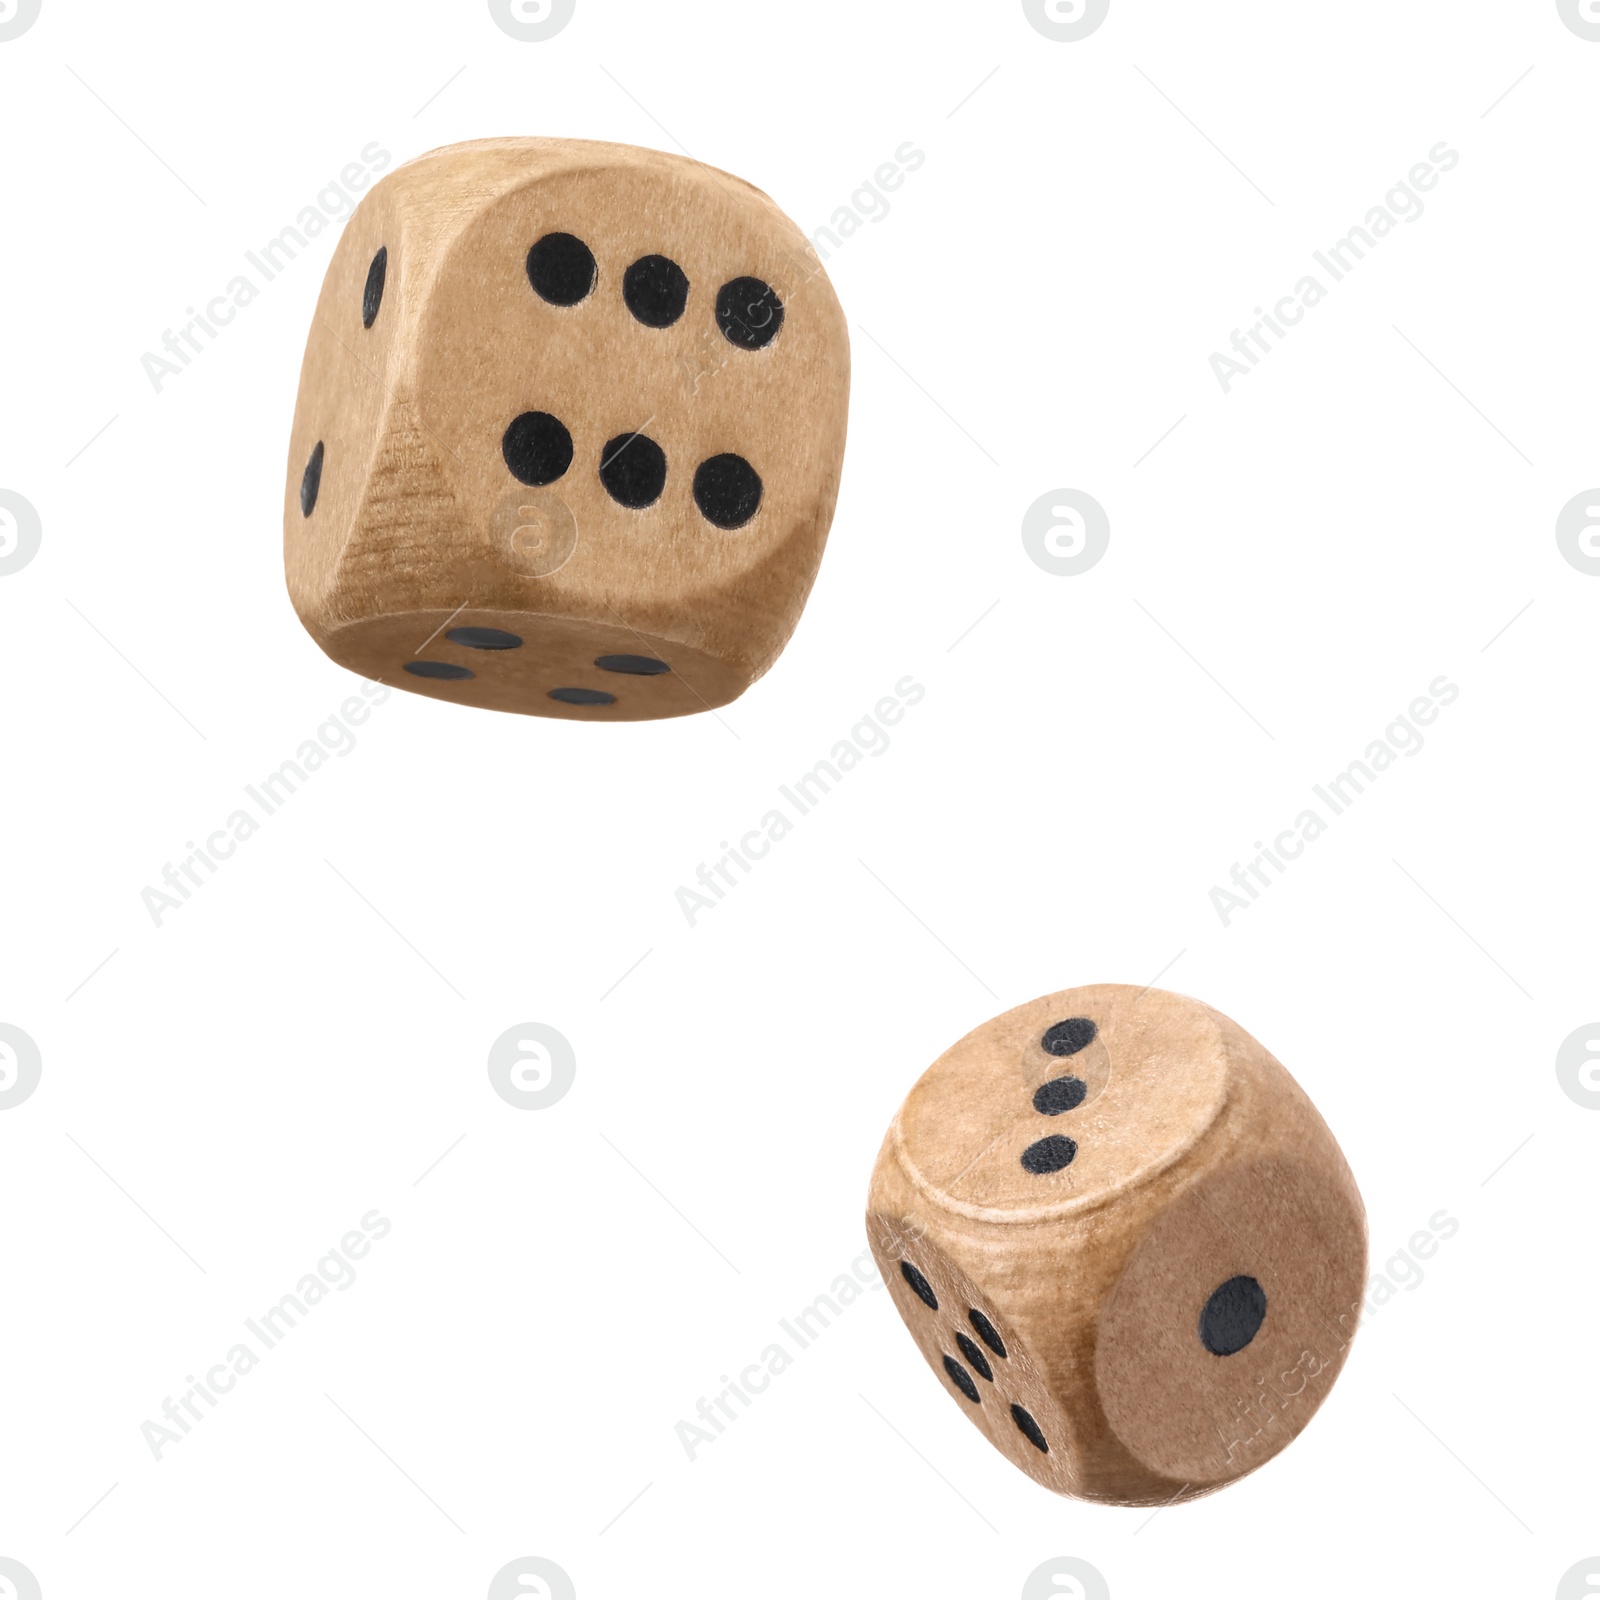 Image of Two wooden dice in air on white background